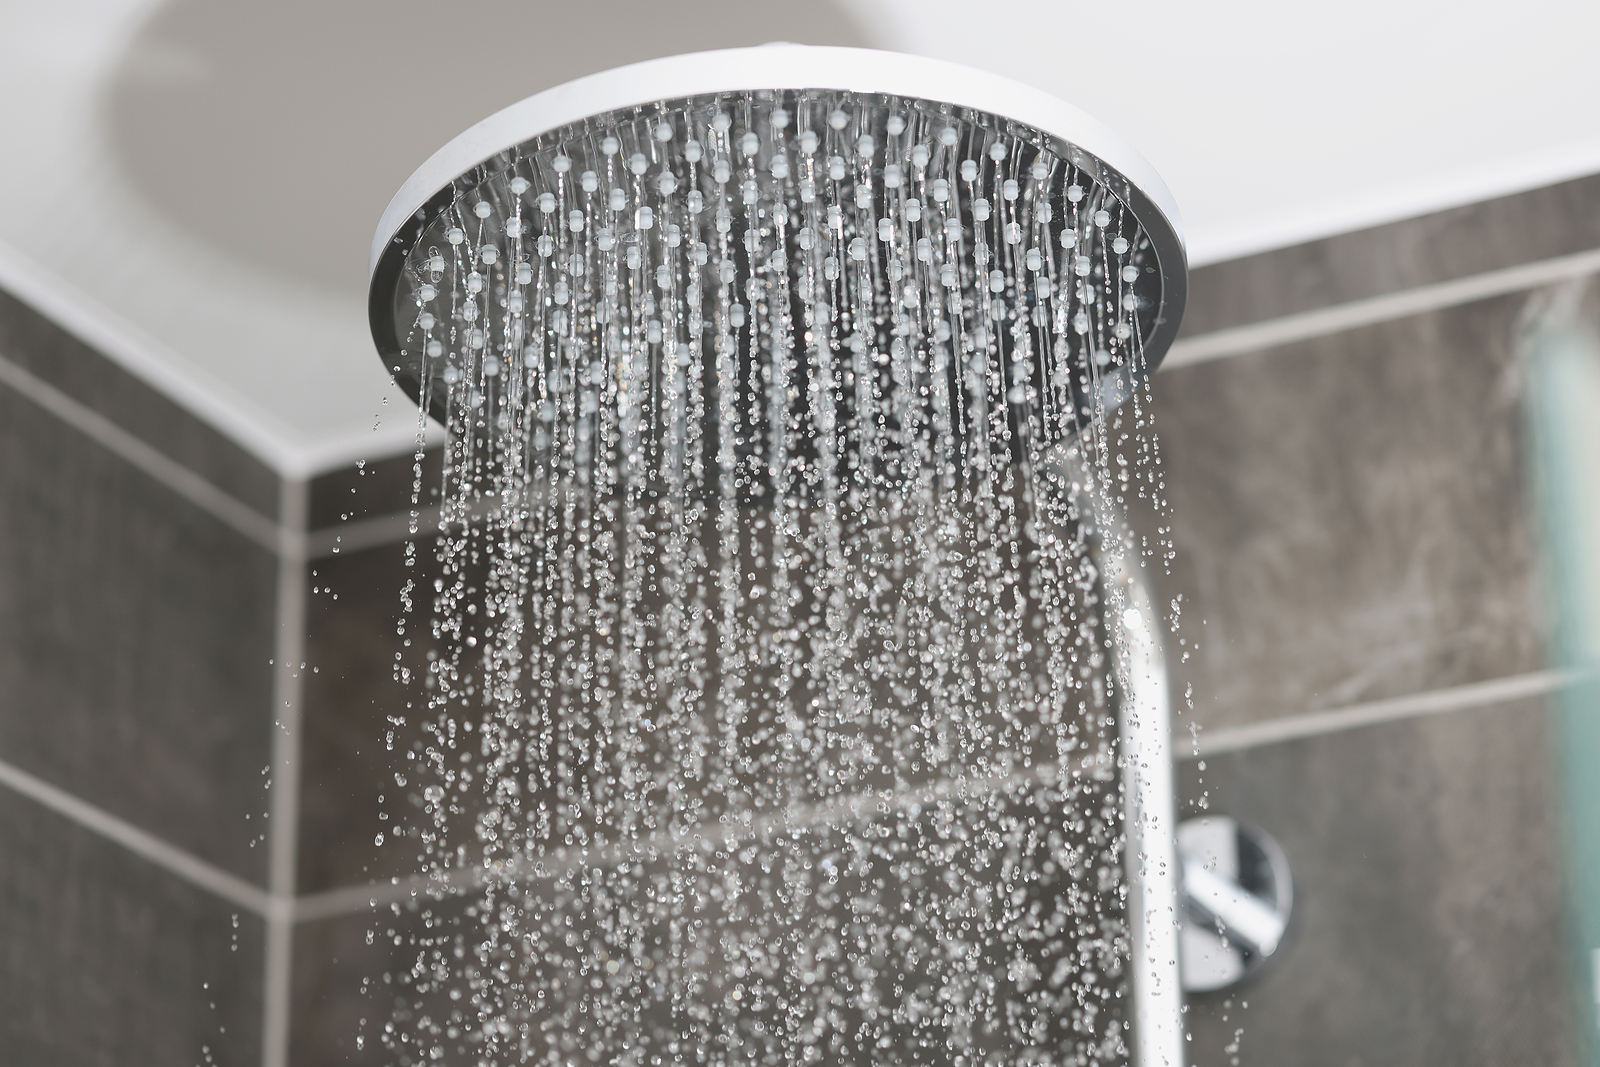 How To Clean Your Faucet & Shower Heads